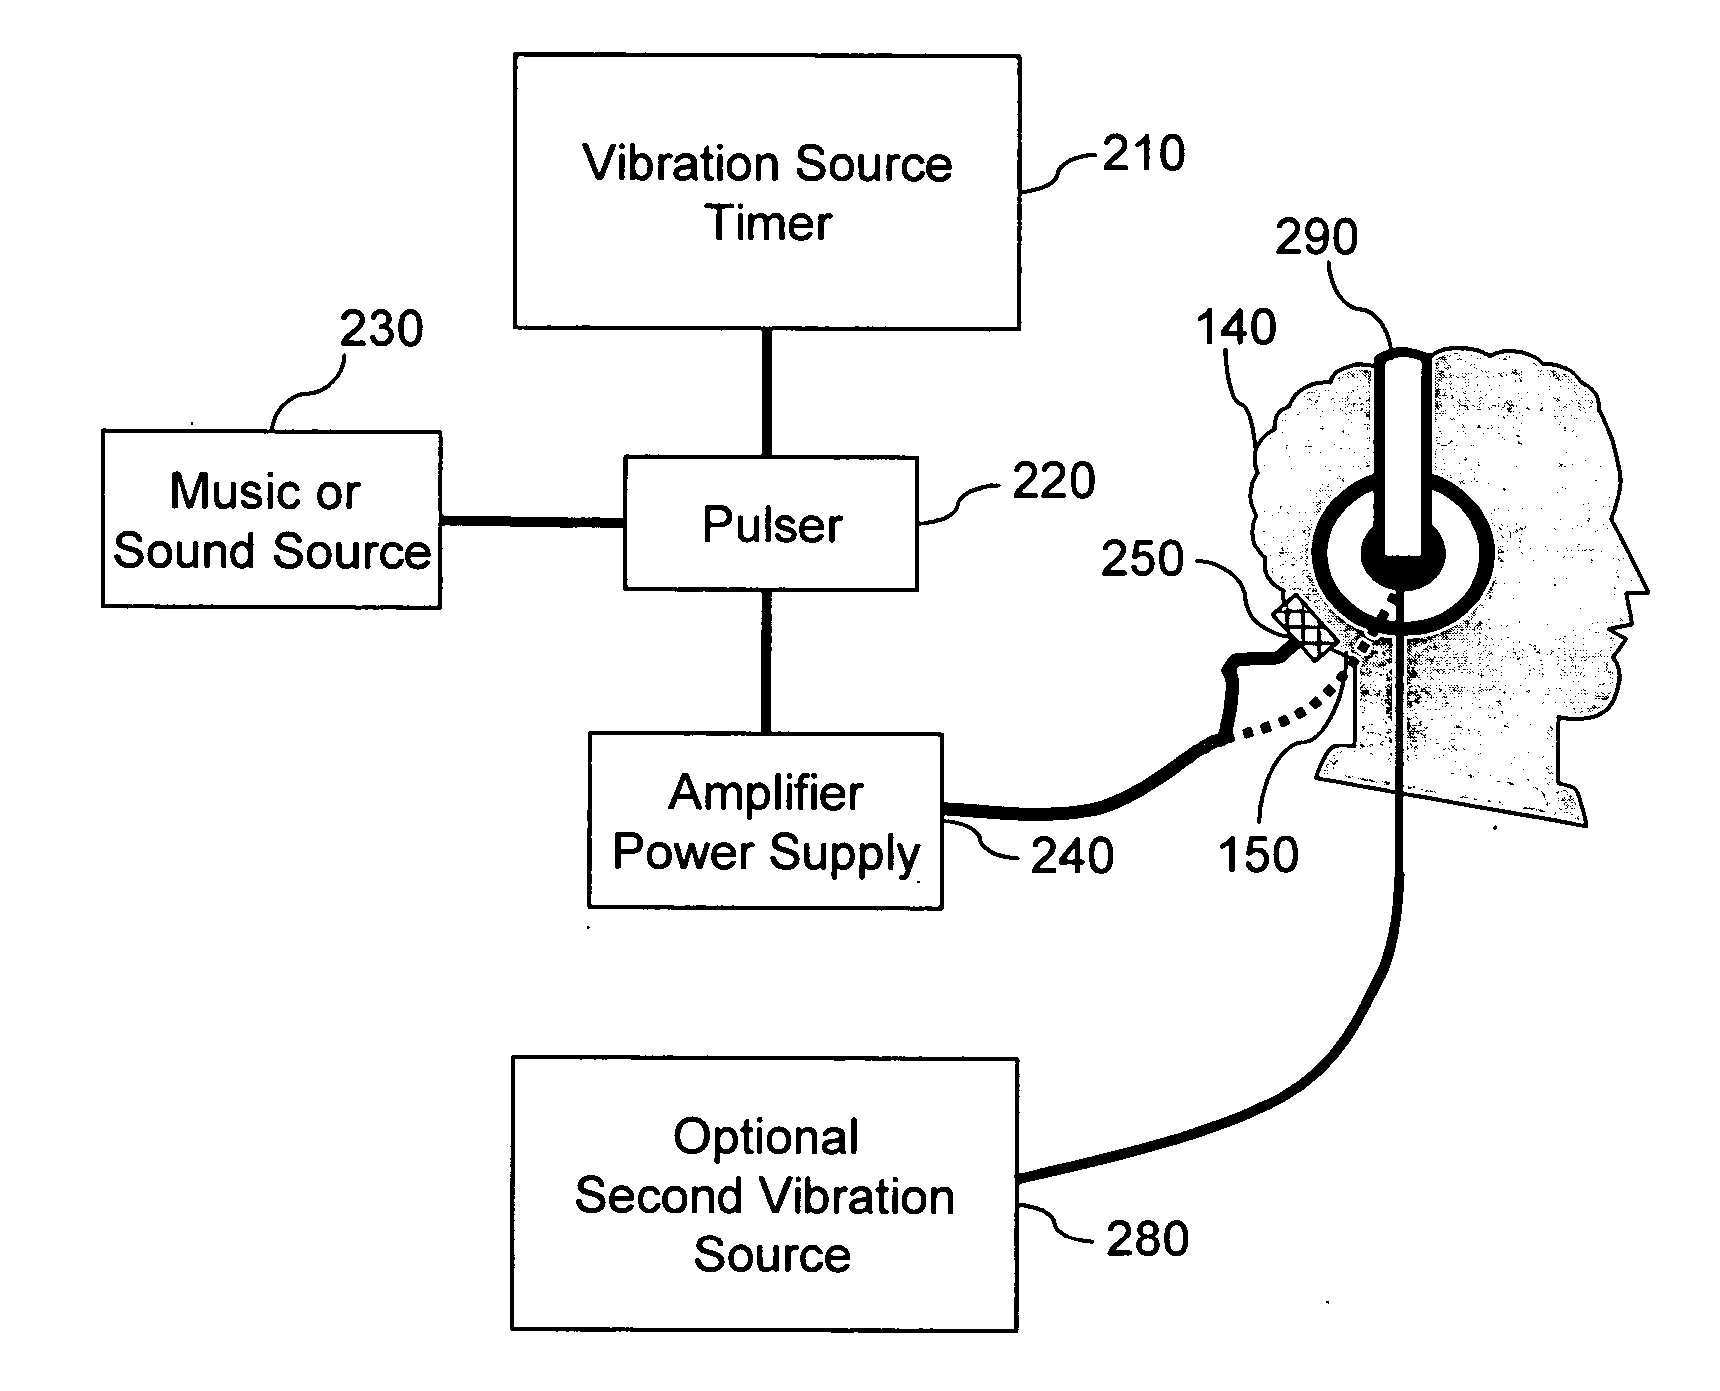 Method and apparatus for improving hearing in patients suffering from hearing loss